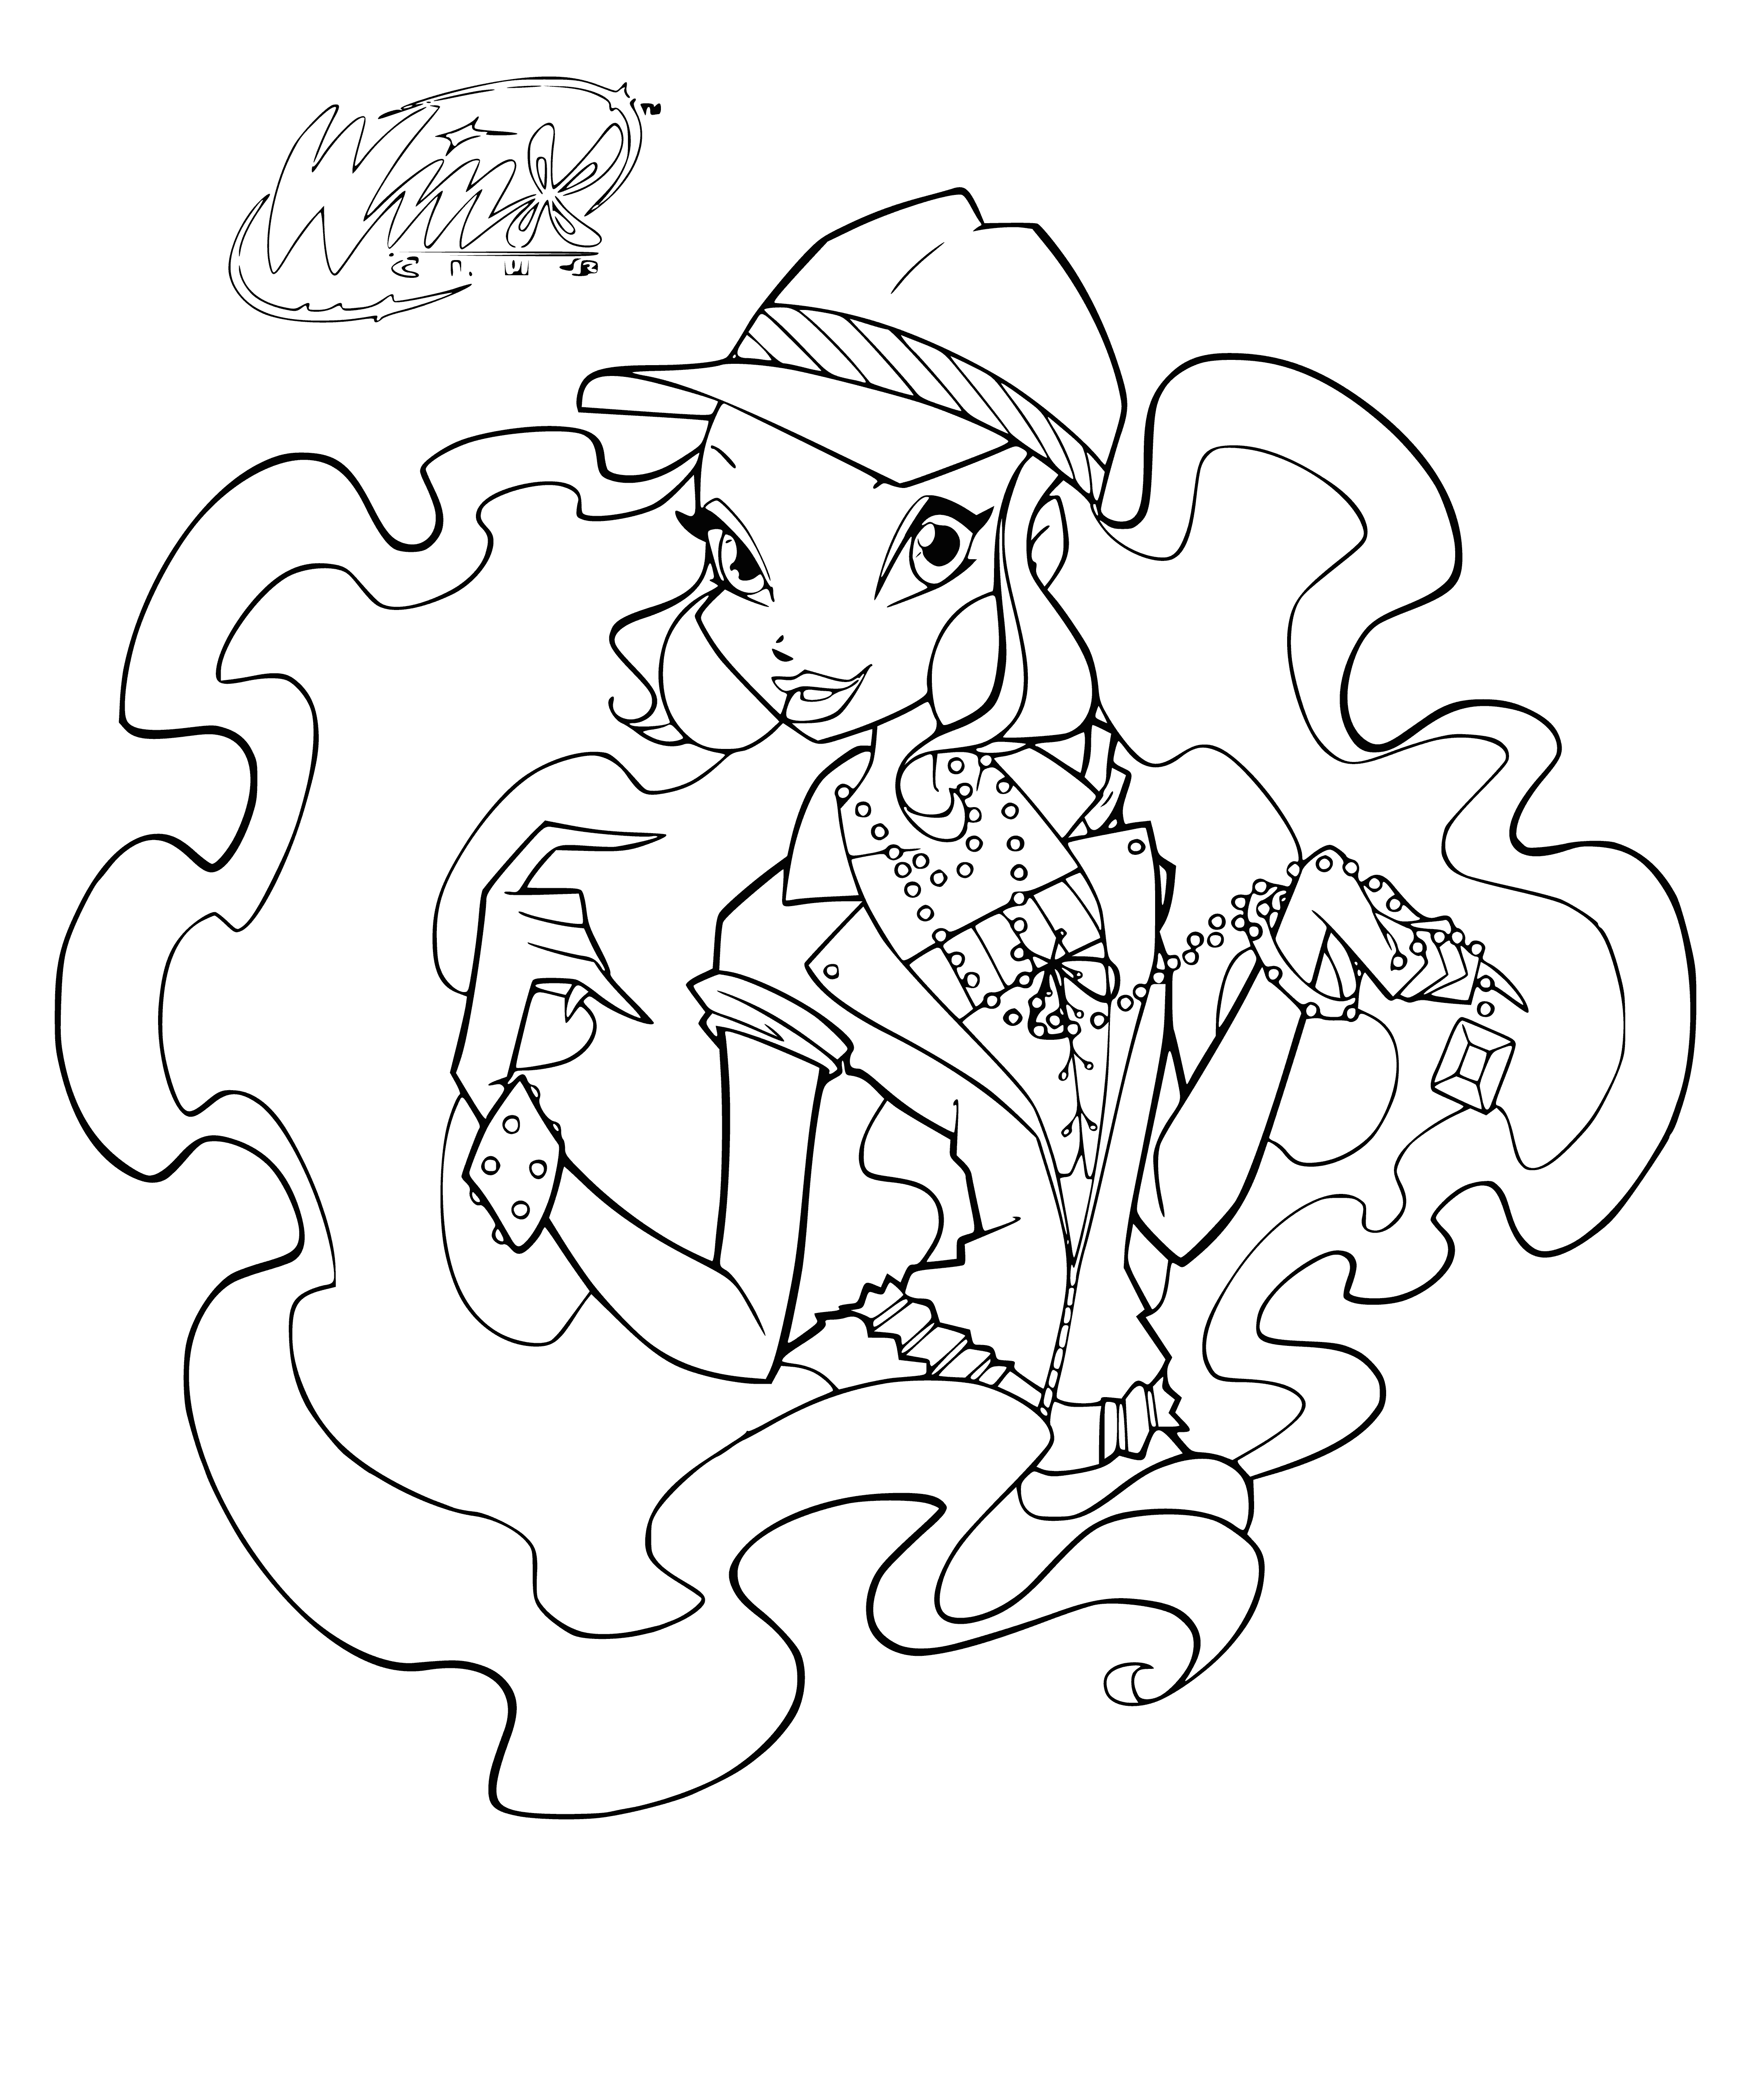 coloring page: Leila poses in a colorful dress and fashionable updo, sporting necklace & bracelet. #coloringpage